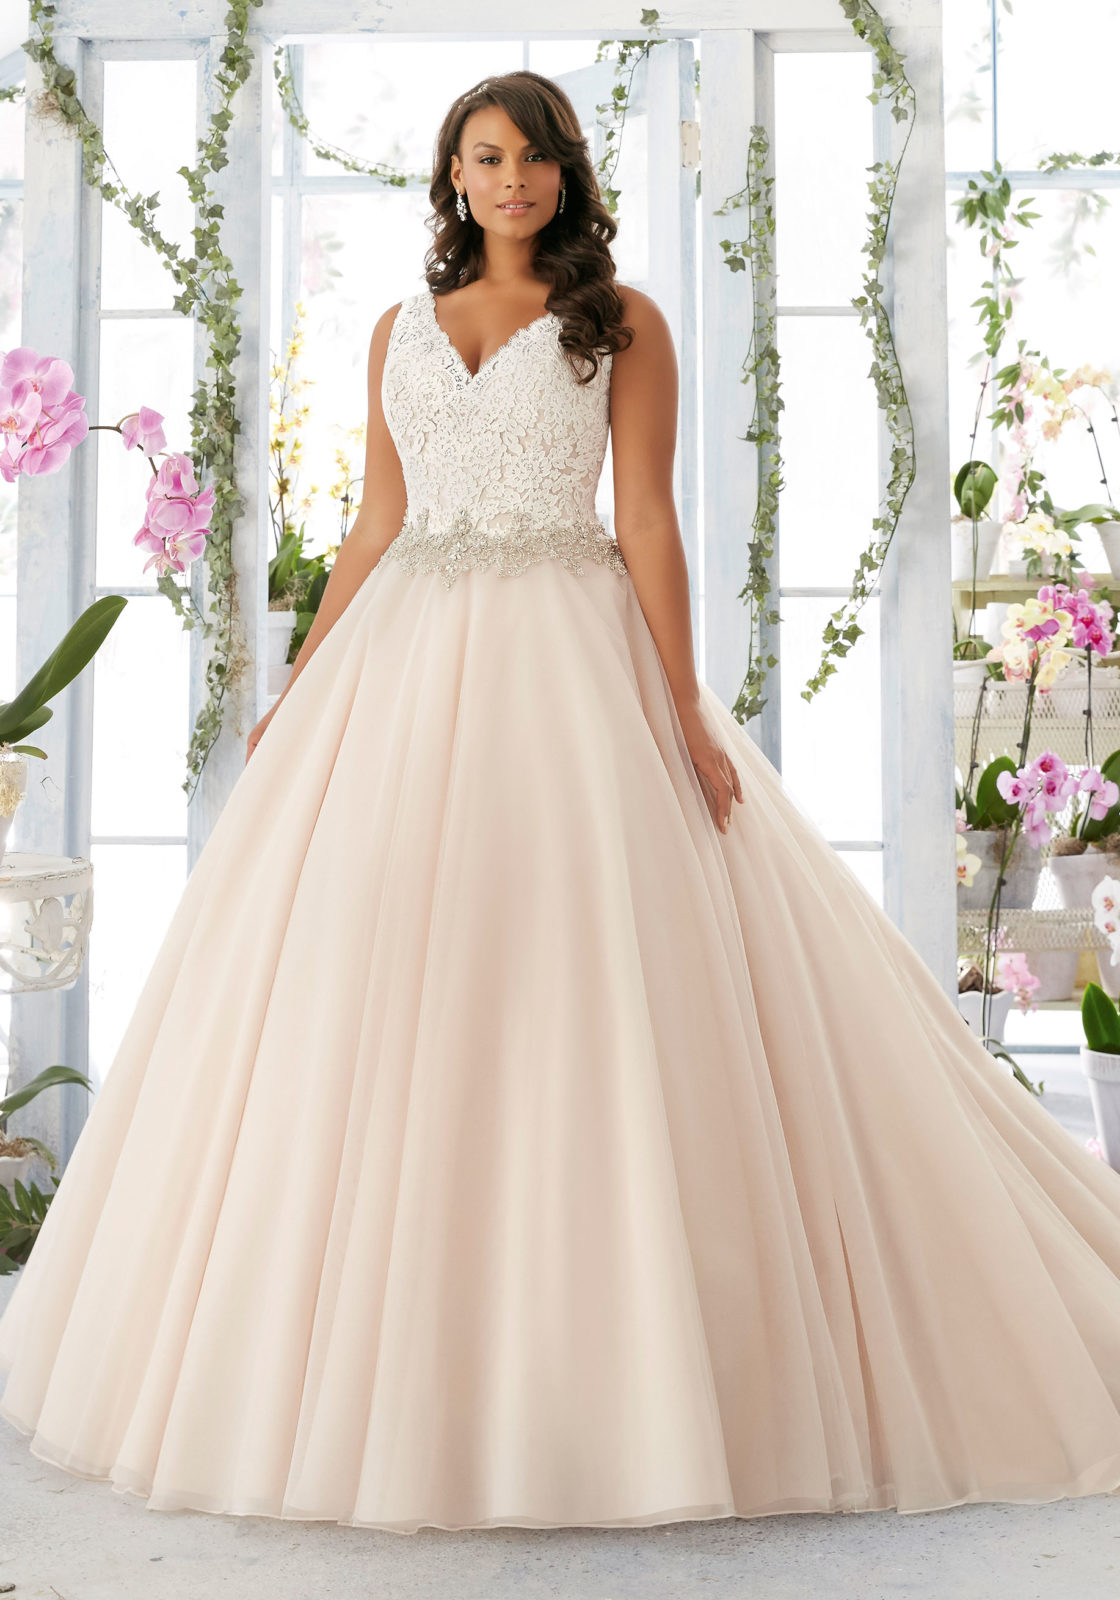 dresses for wedding size 16